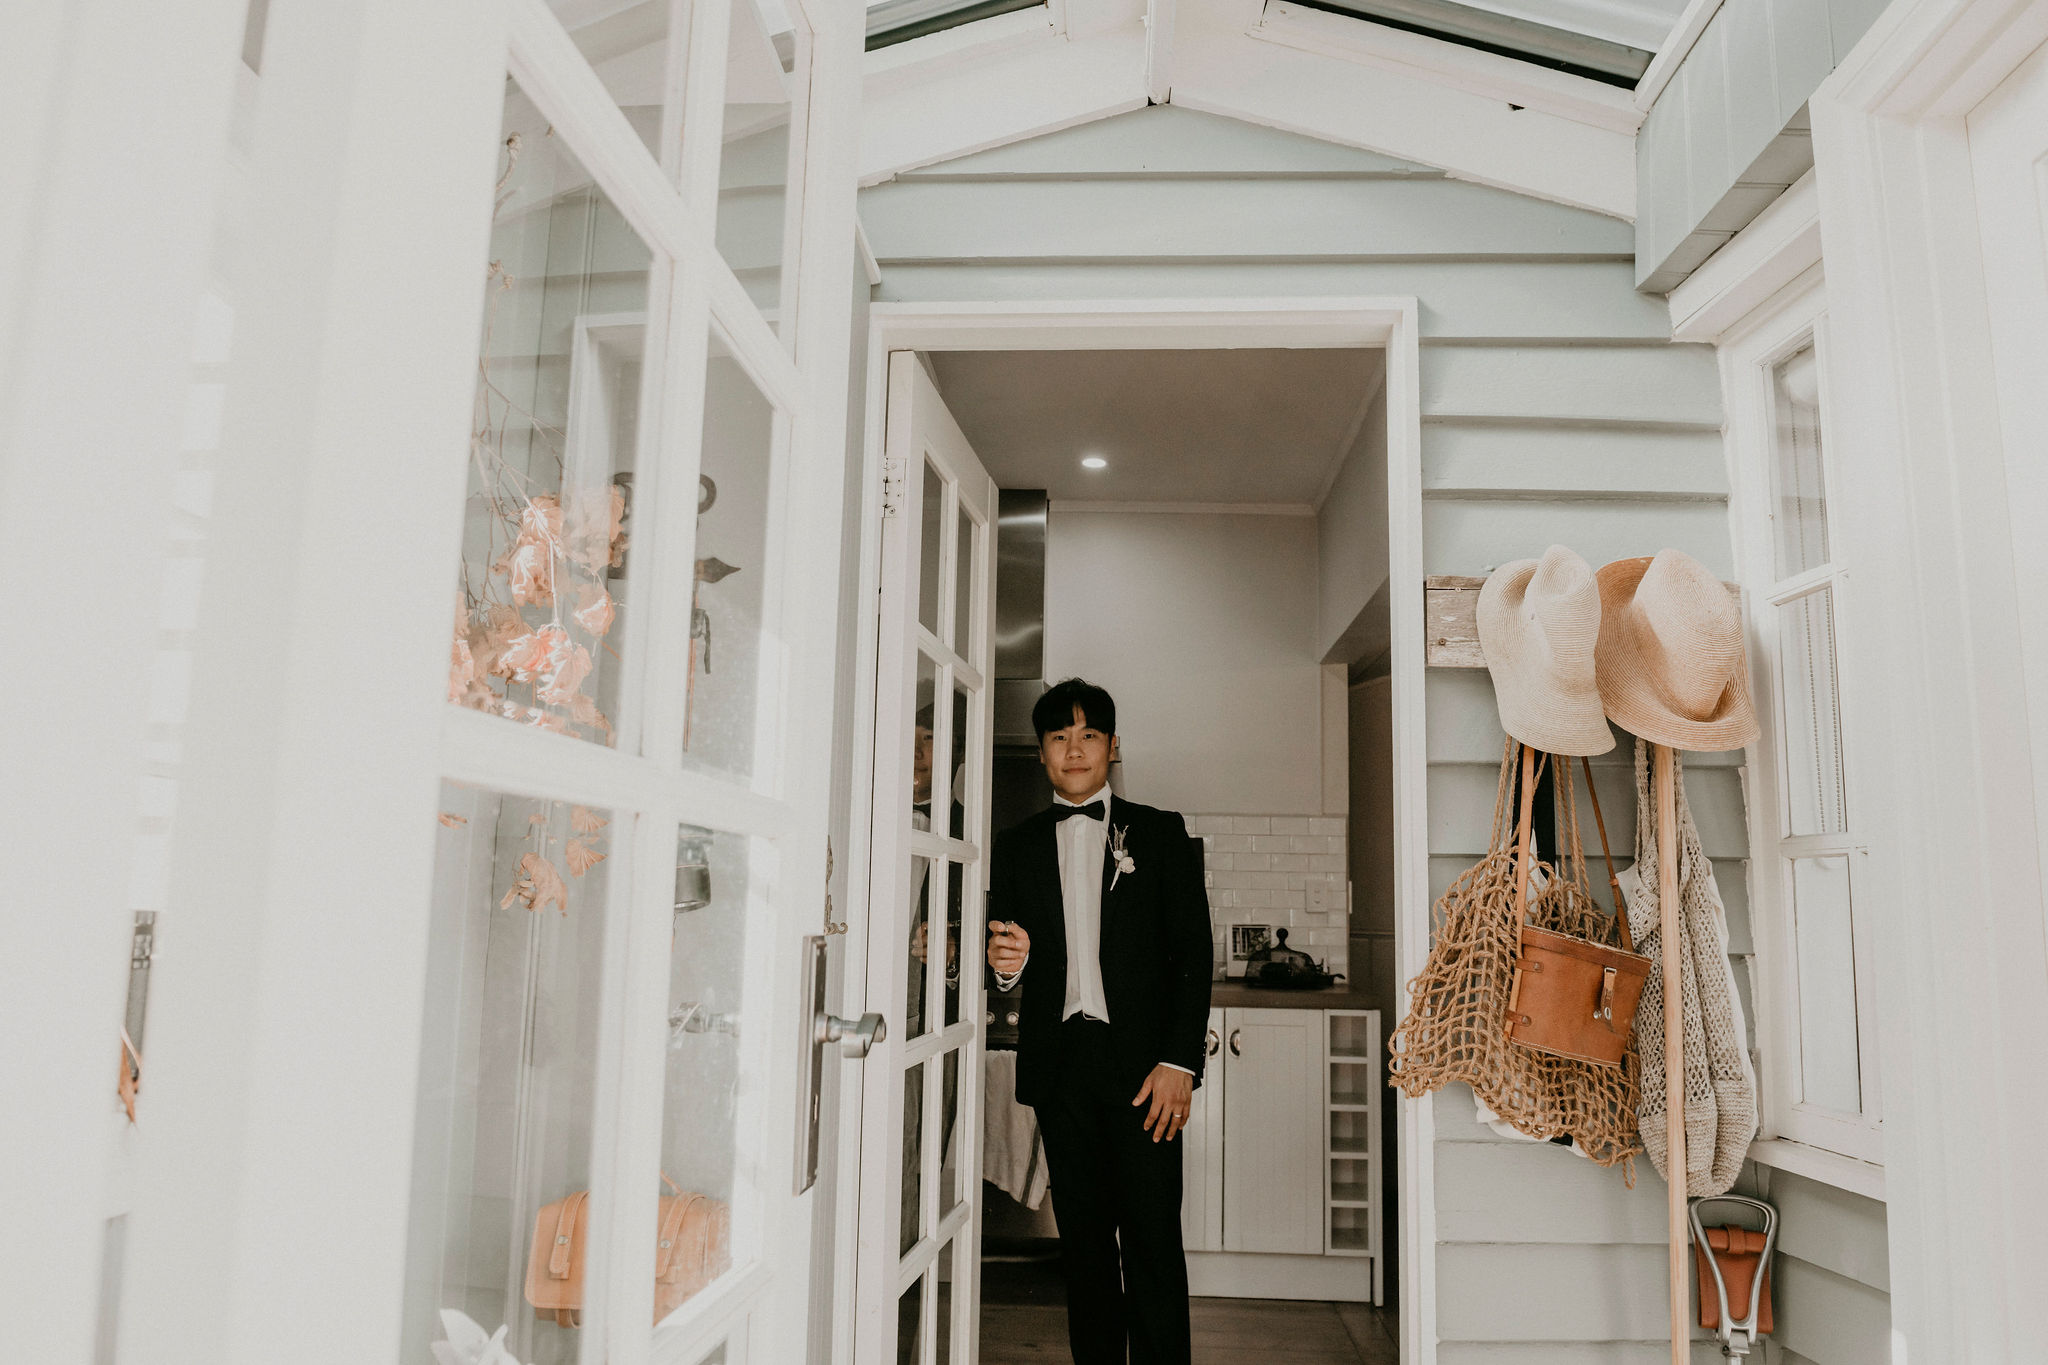 Groom looking back through the door way towards photographer outside smiling after ceremony Let's Elope Melbourne Portfolio Celebrant Photographer Elopement Packages Victoria Sarah Matler Photography intimate weddings Acre of Roses Trentham romantic ceremony